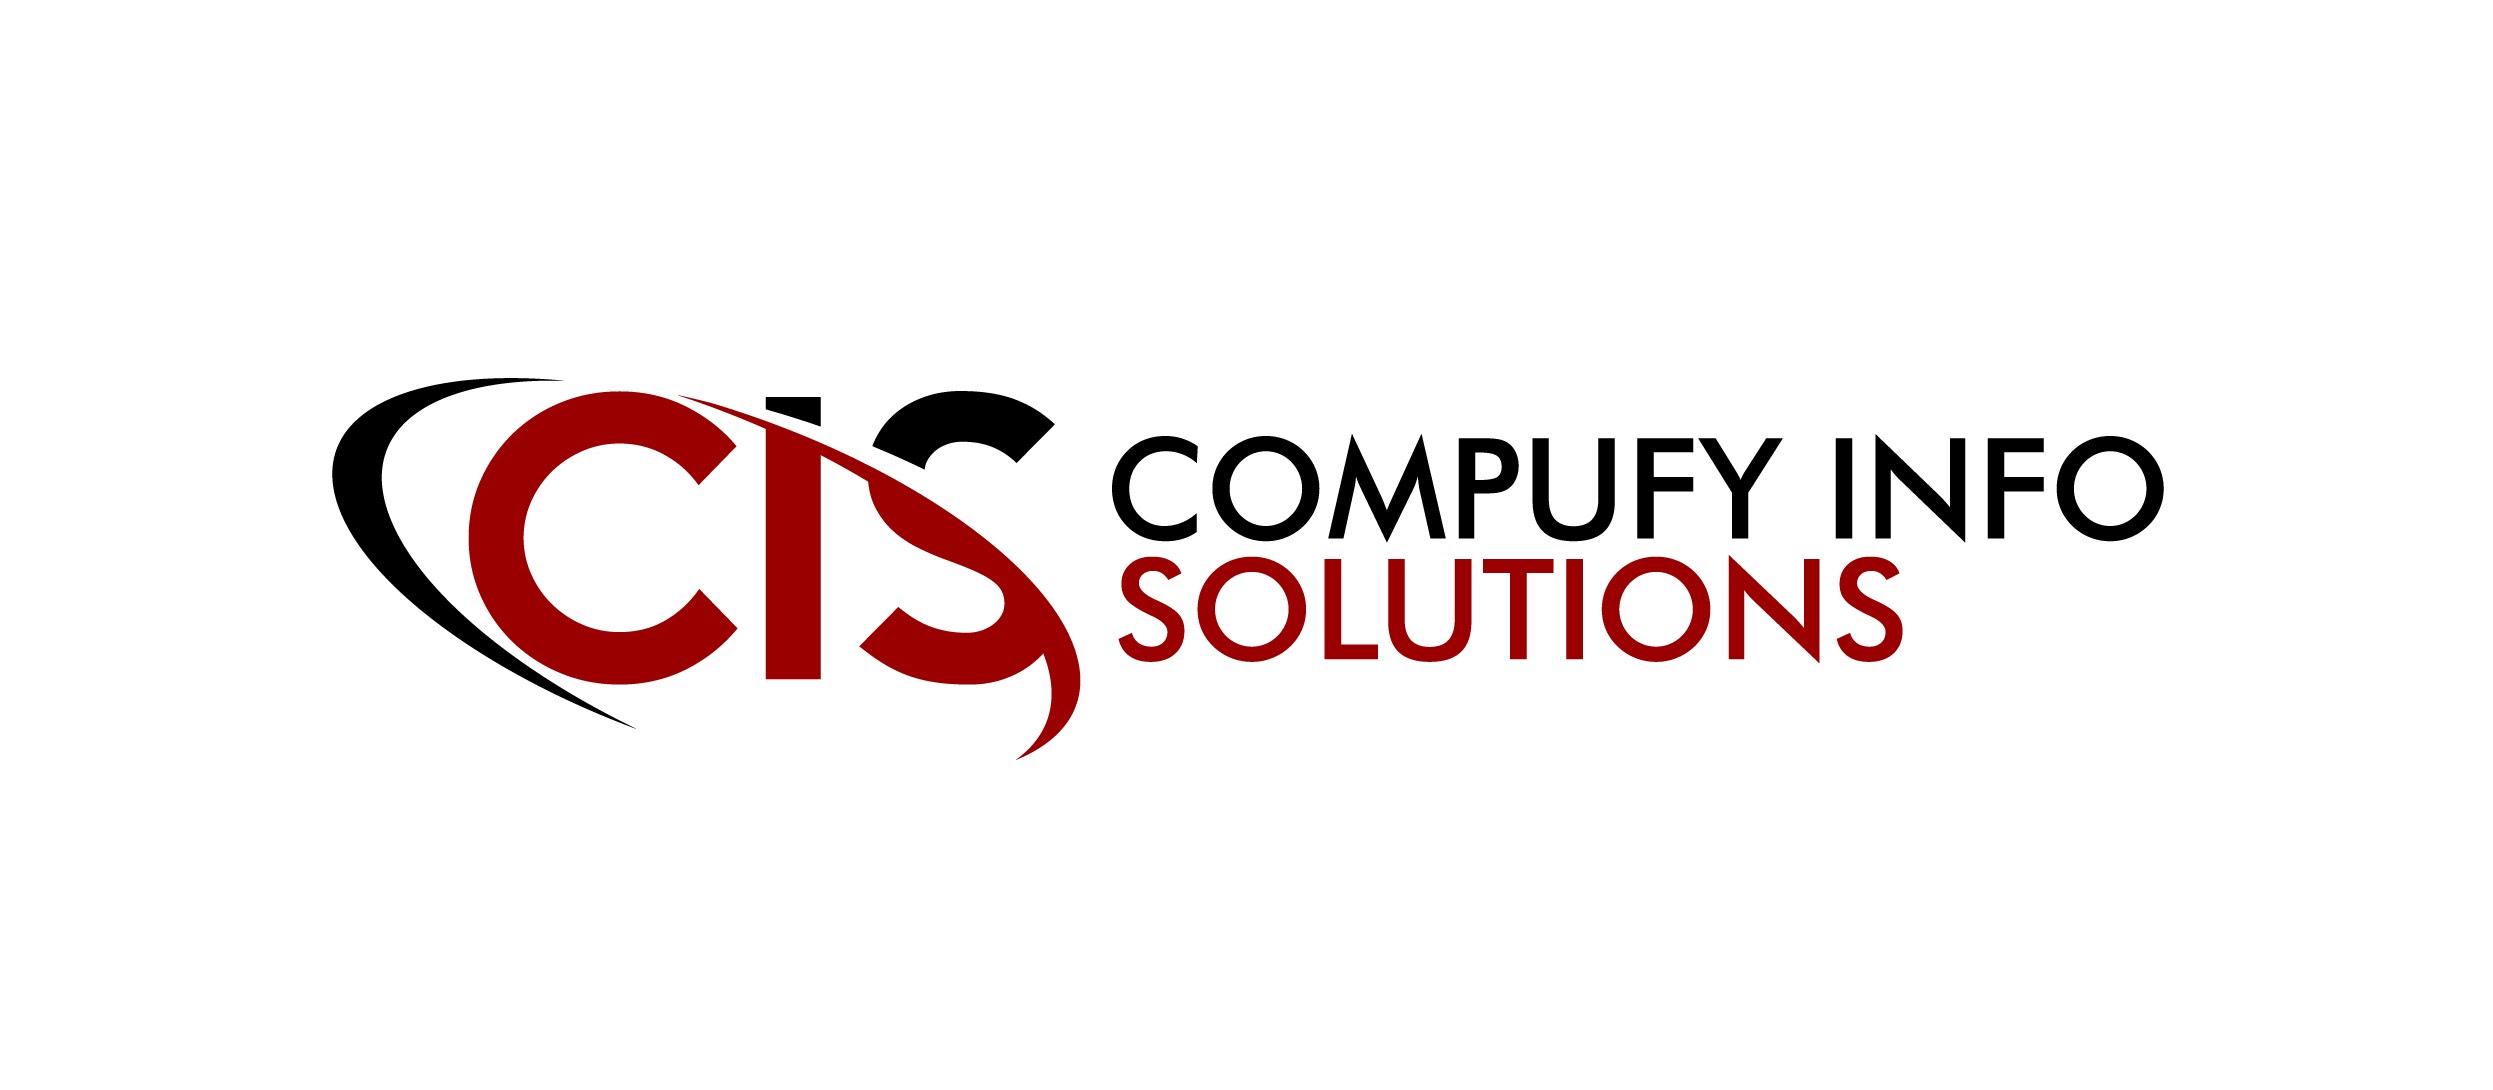 Compufy Info Solutions LLP profile on Qualified.One